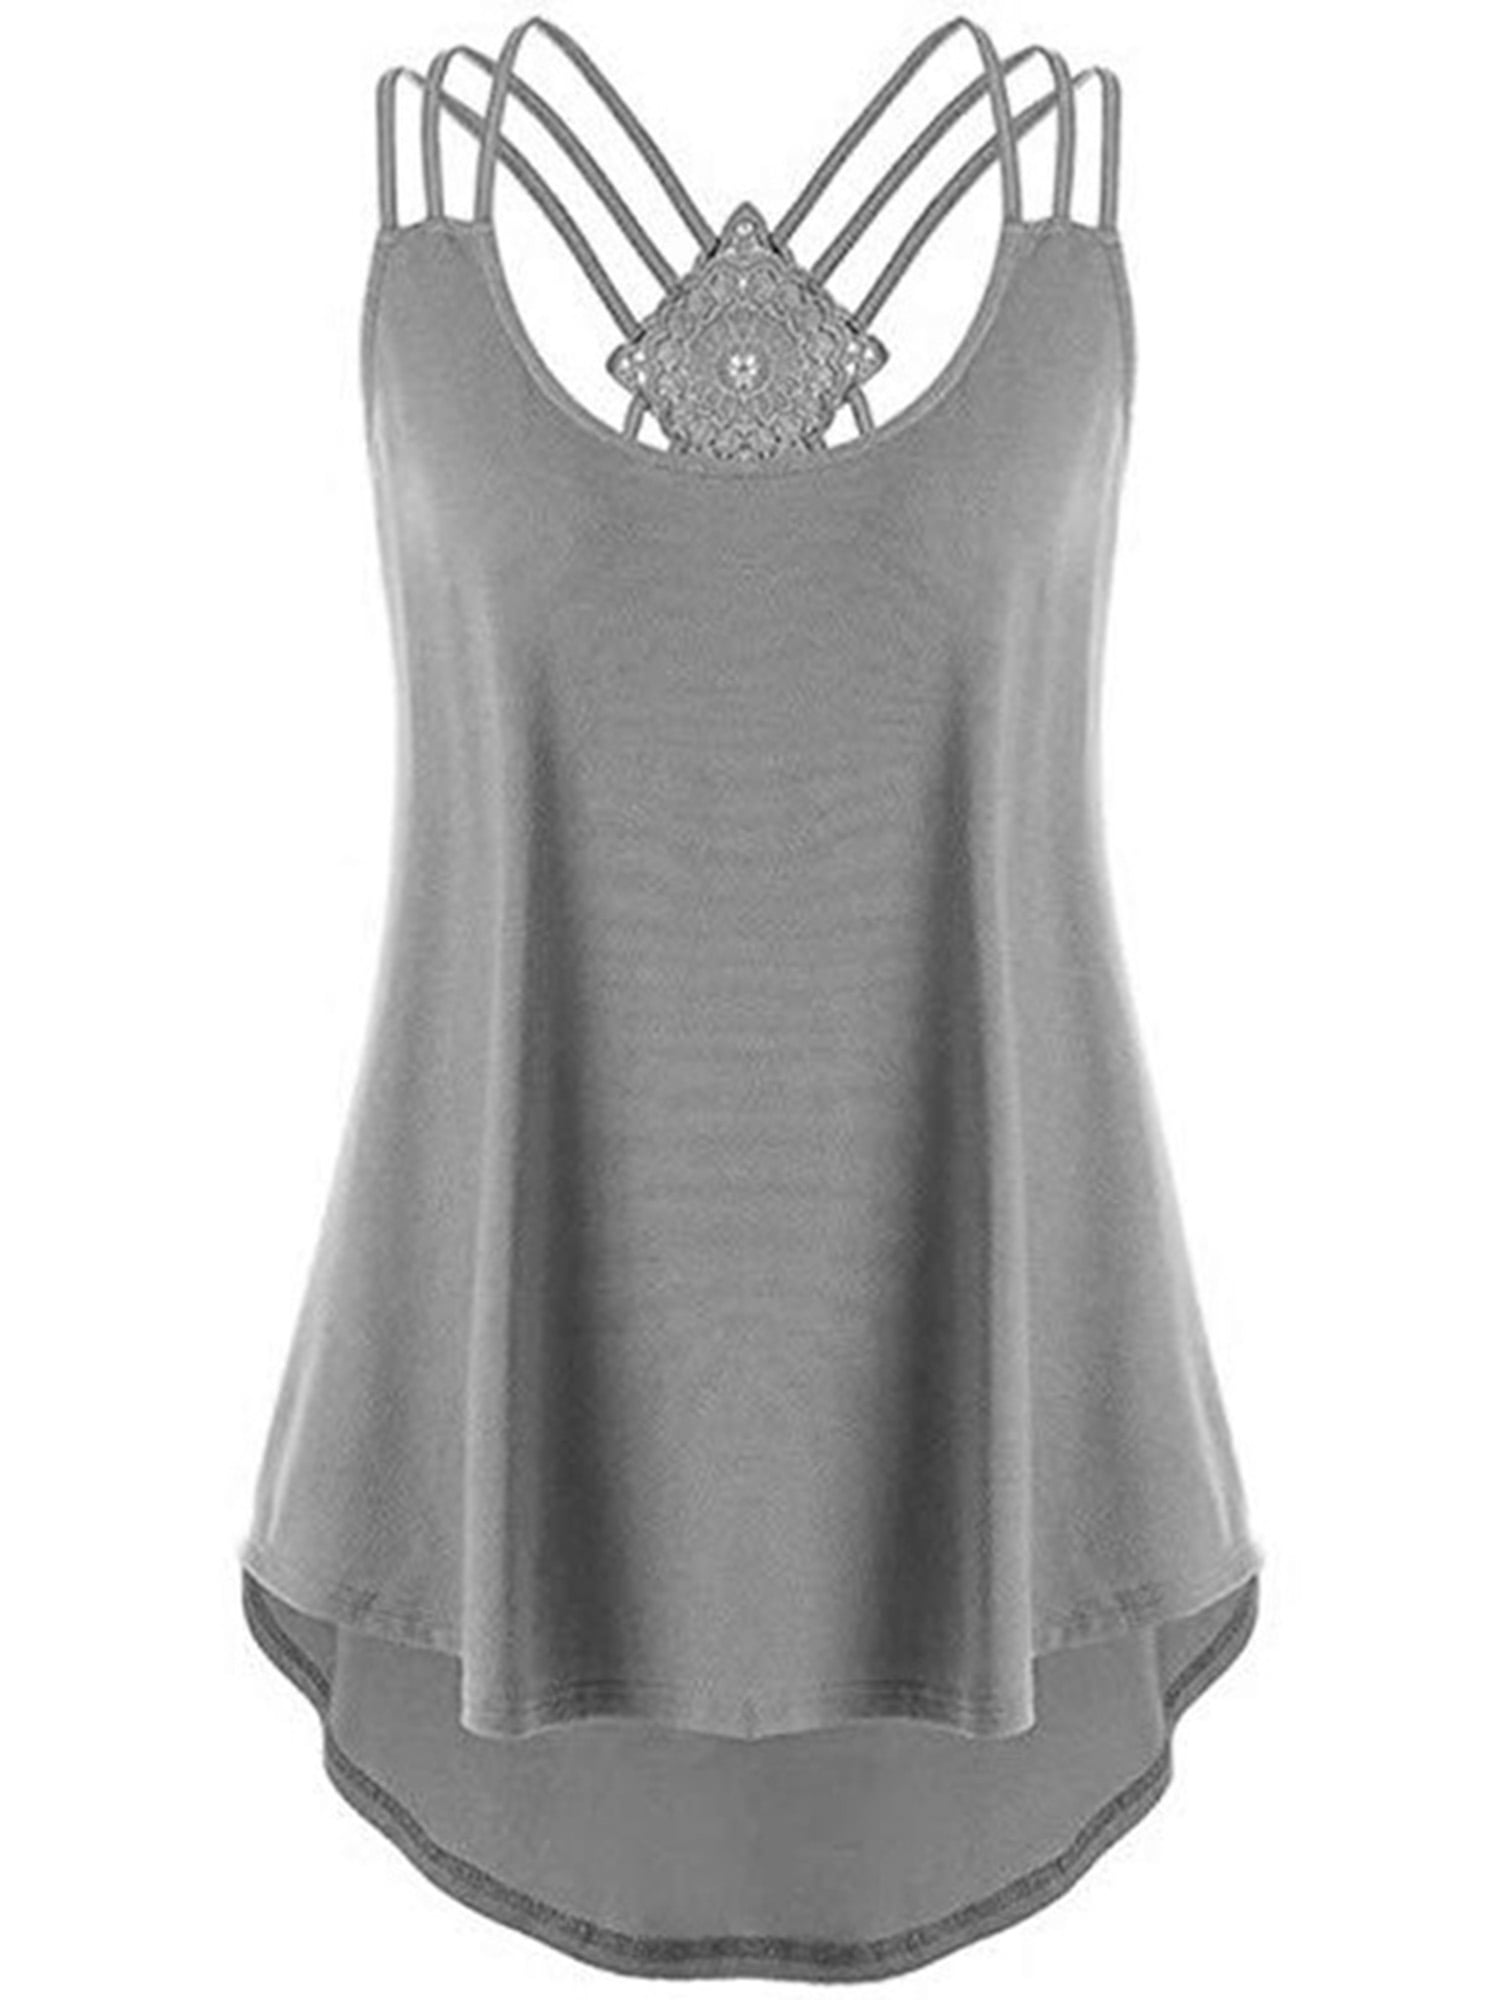 Activewear Tank Tops for Womens Sleeveless Casual Loose Tunic Shirts ...